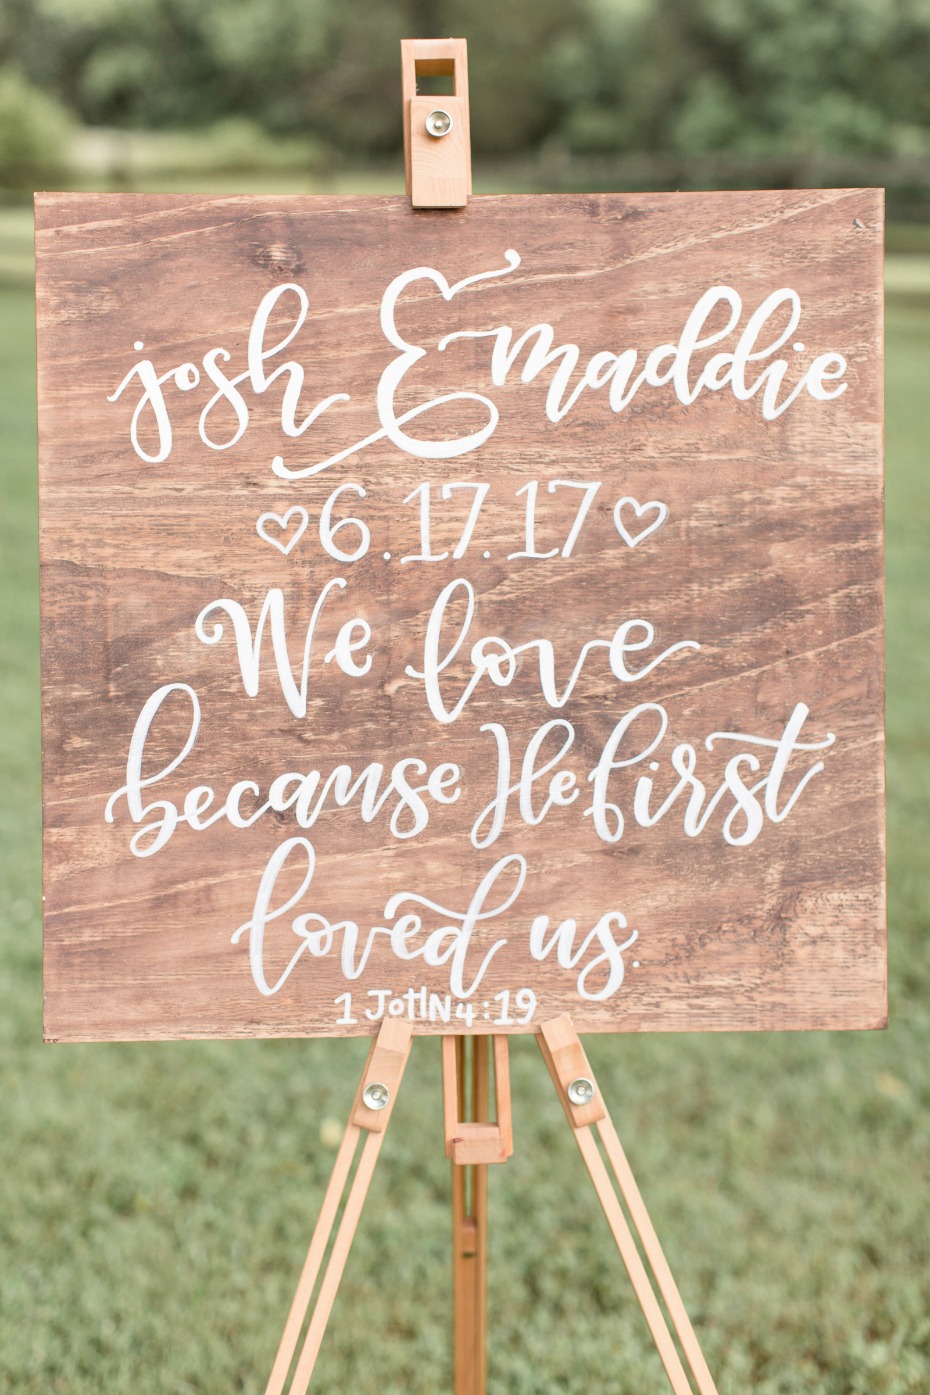 wooden sign with calligraphy Bible verse on it. We love because he first loved us - 1 John 4:19